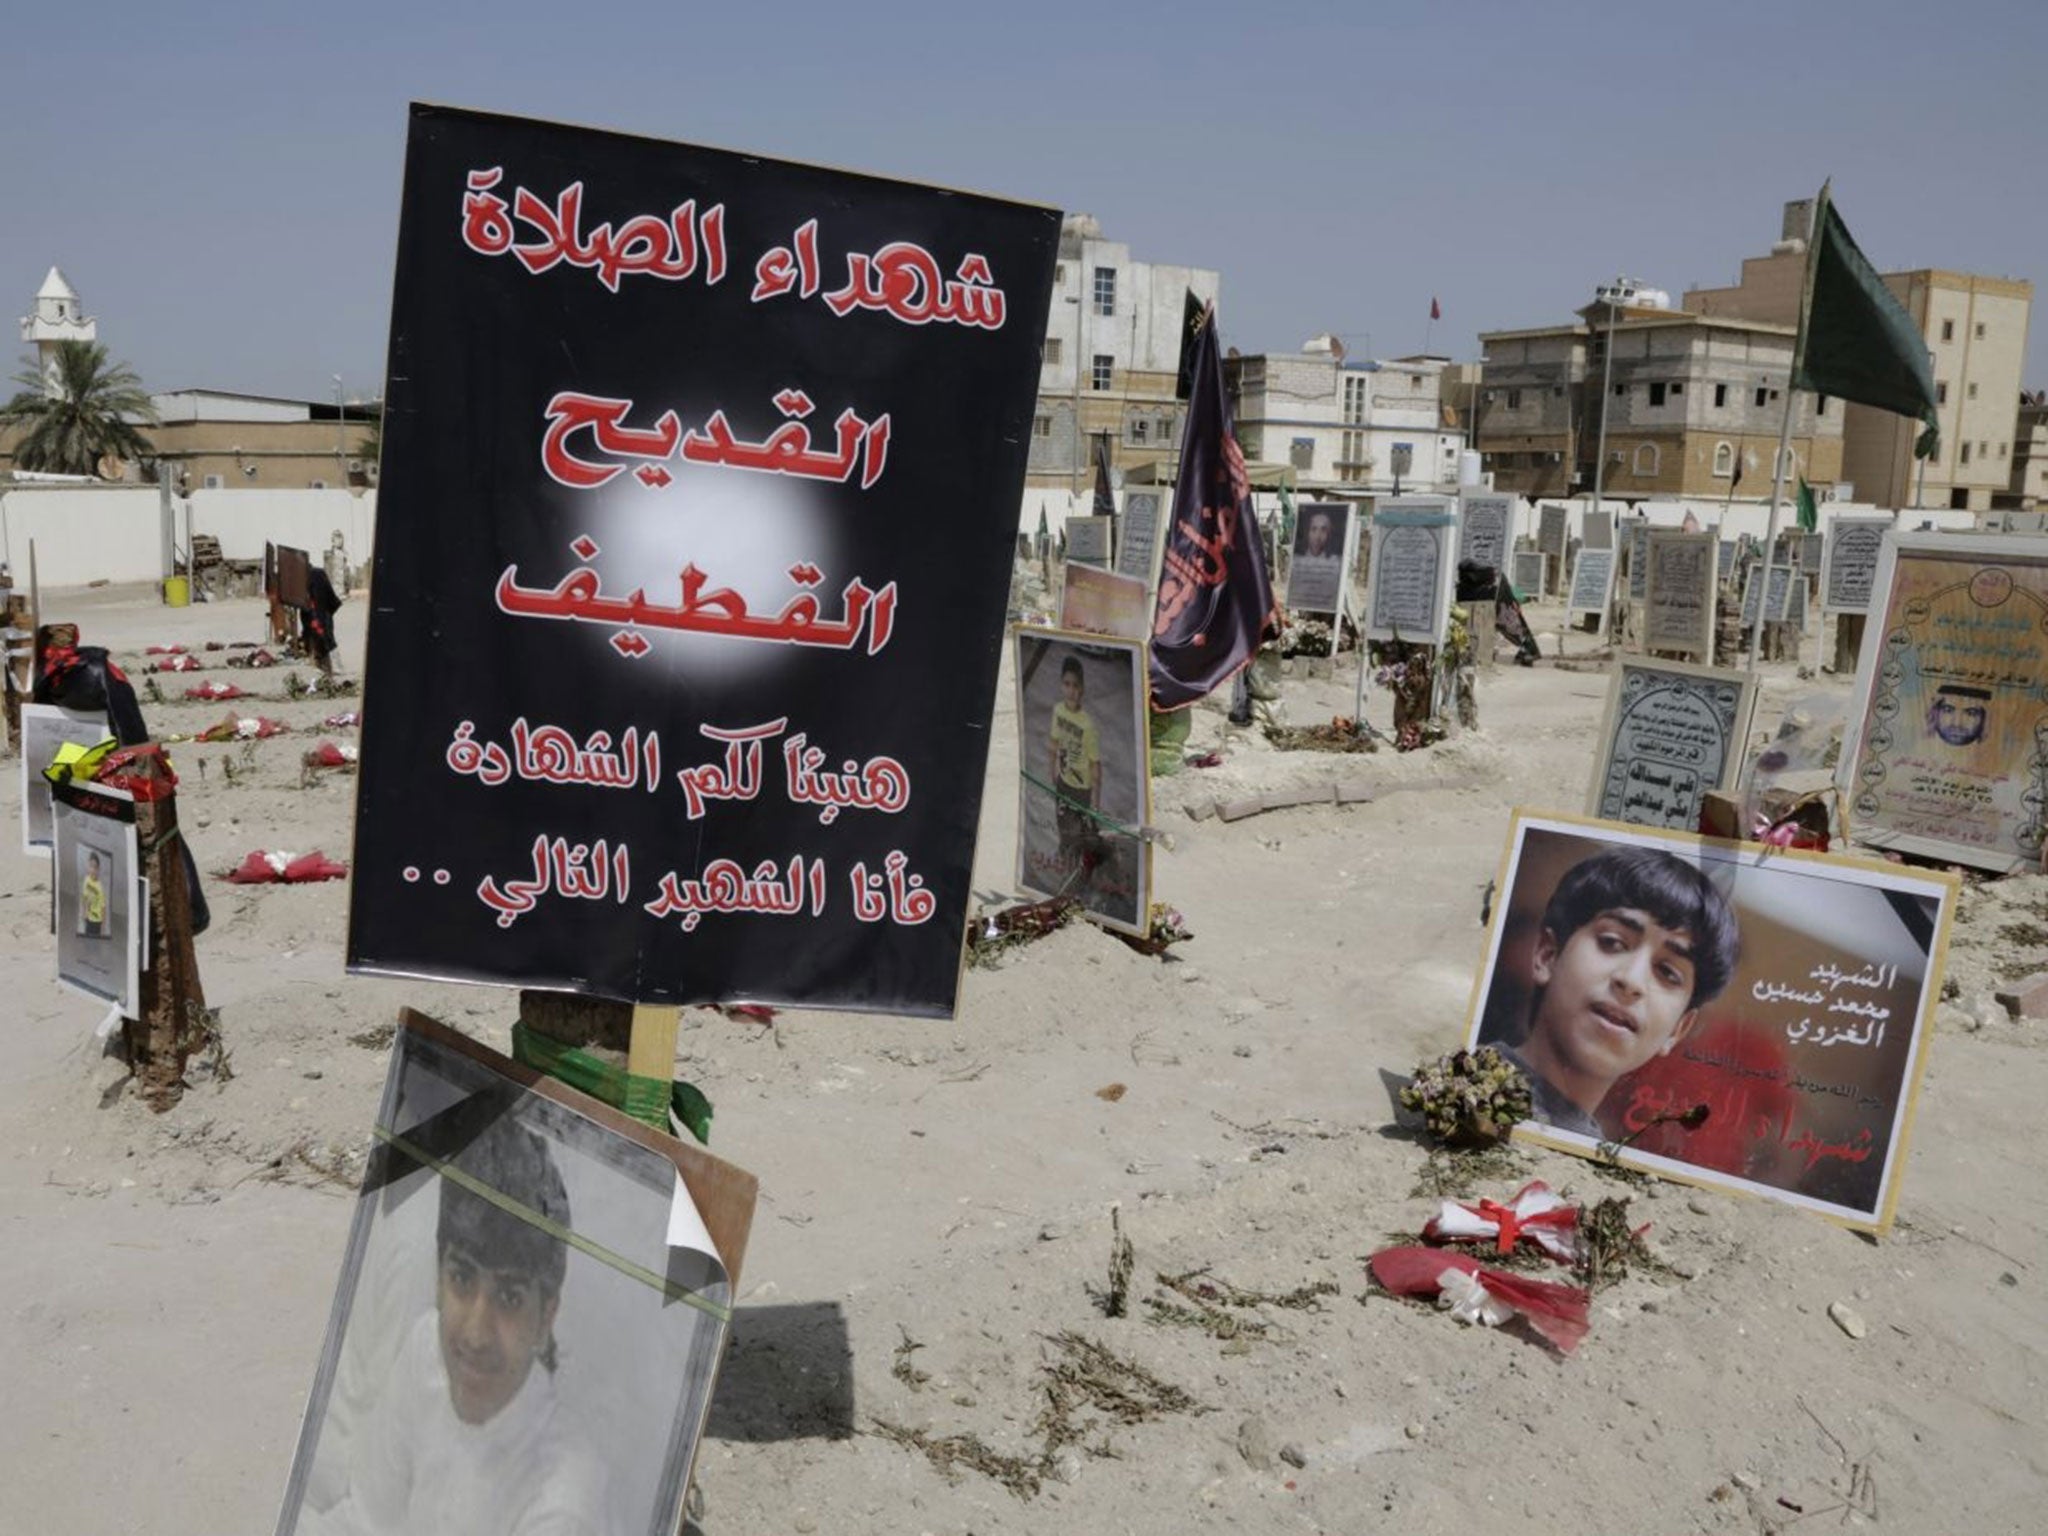 Religious flags, photographs and tributes to 21 victims of a suicide bombing of a Shiite mosque, at a cemetery in al-Qudeeh, Saudi Arabia.